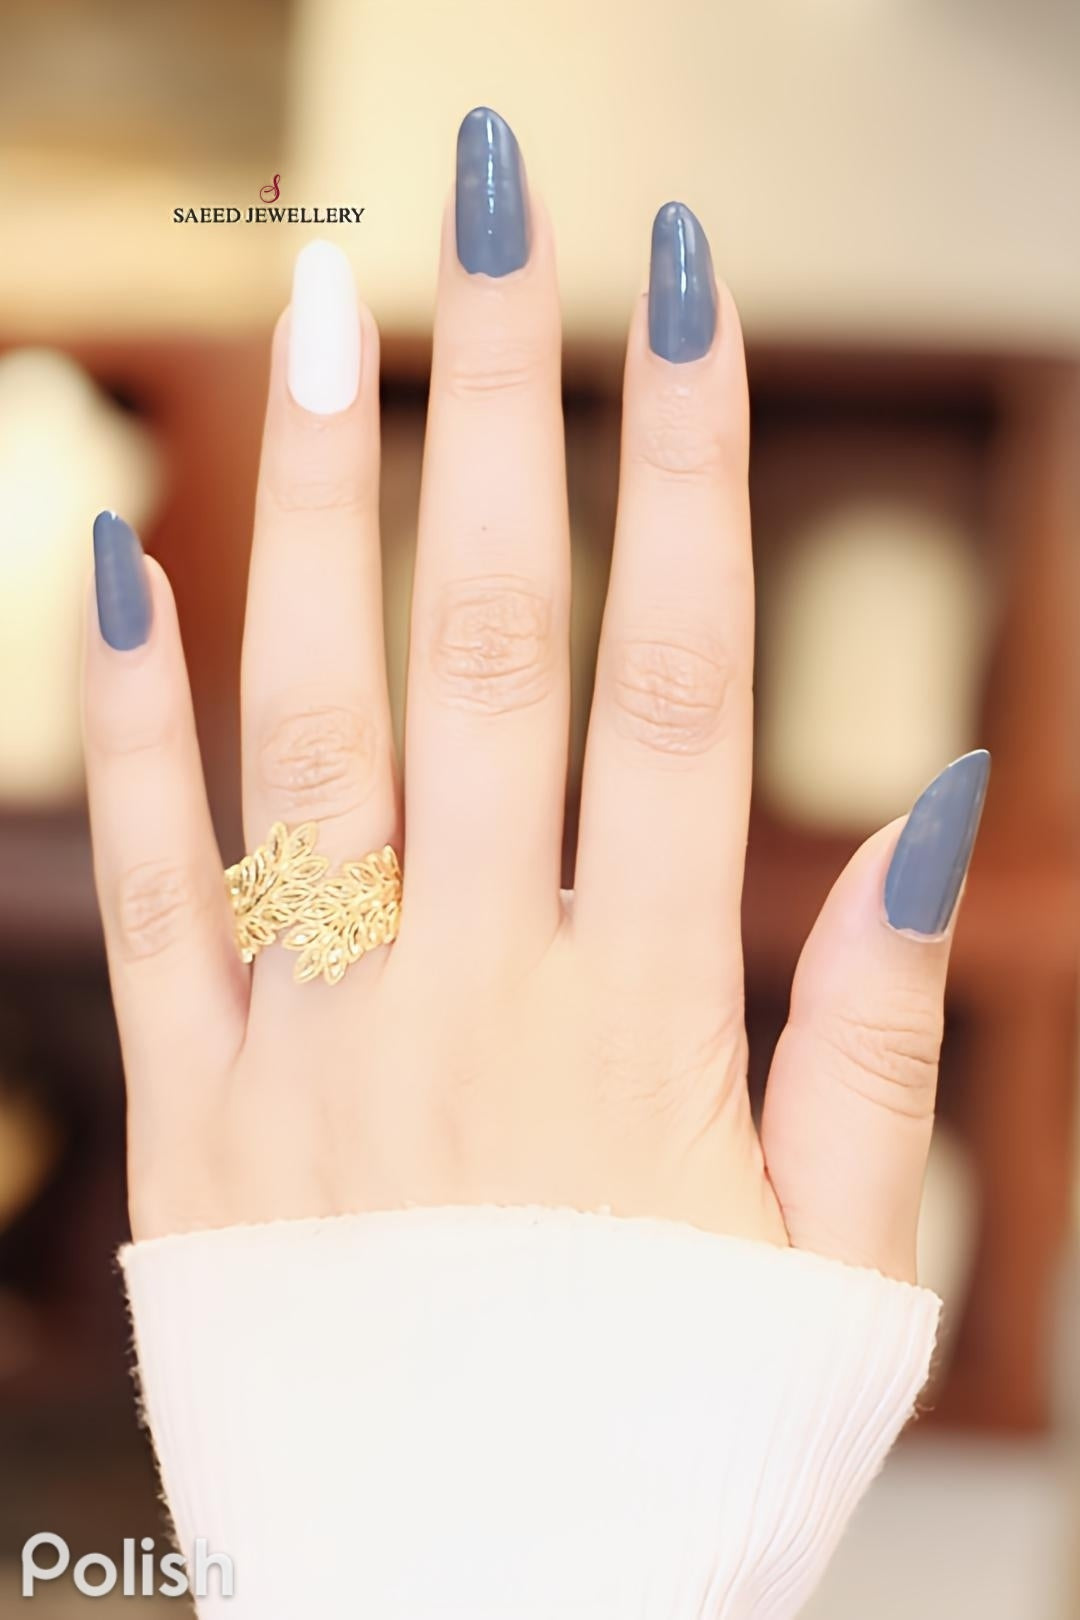 21K Spike Ring Made of 21K Yellow Gold by Saeed Jewelry-24369